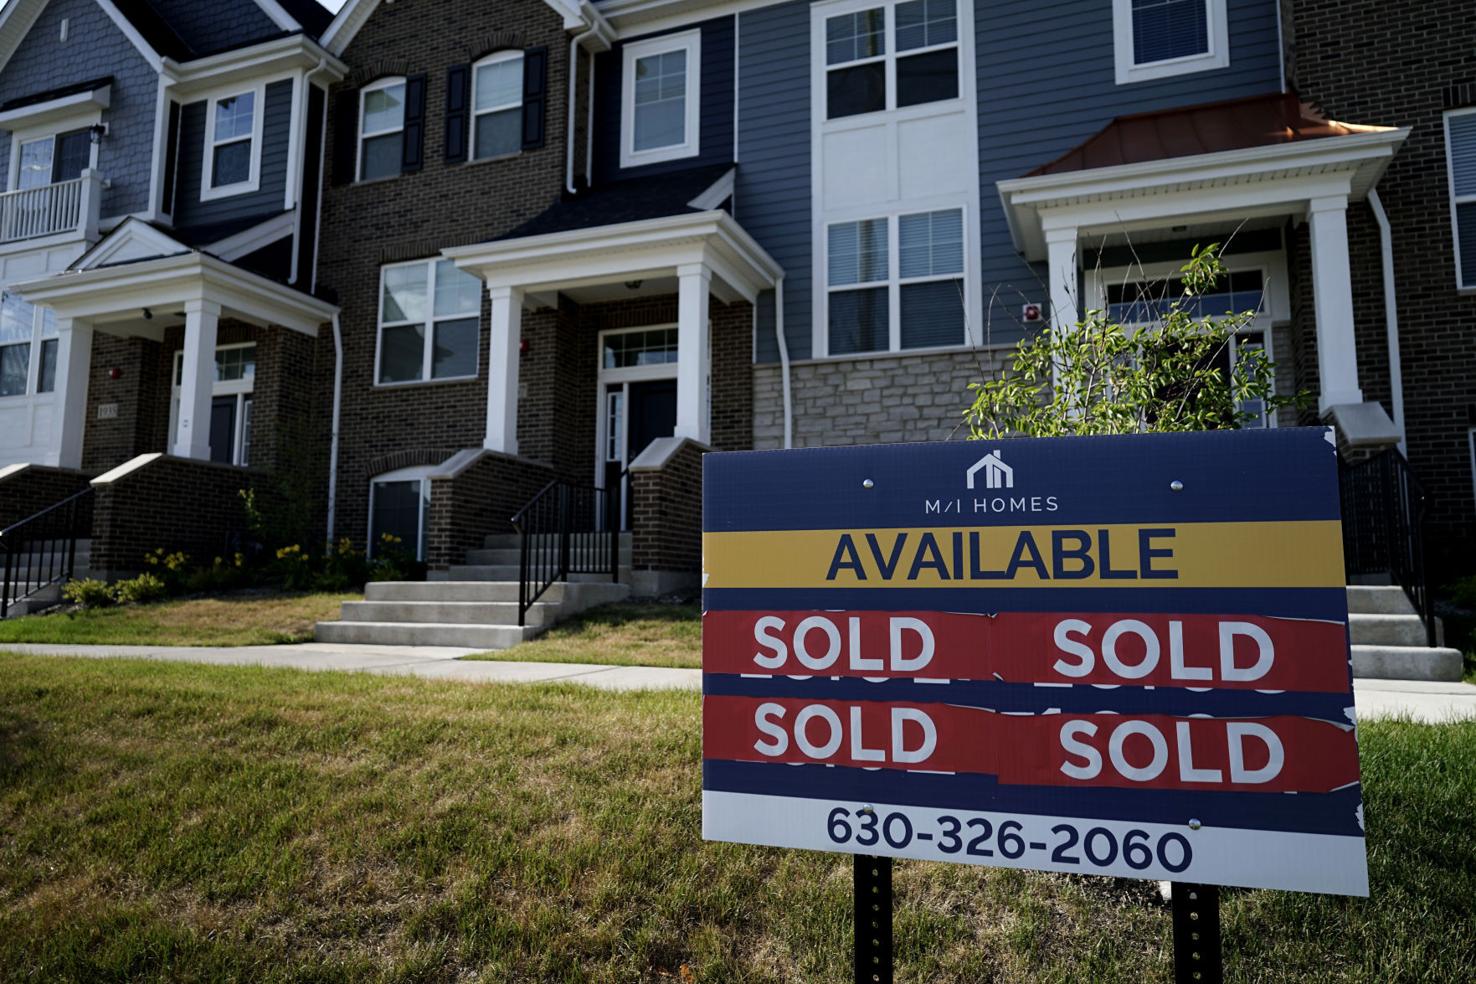 Report identifies rising prices as top fear among homebuyers